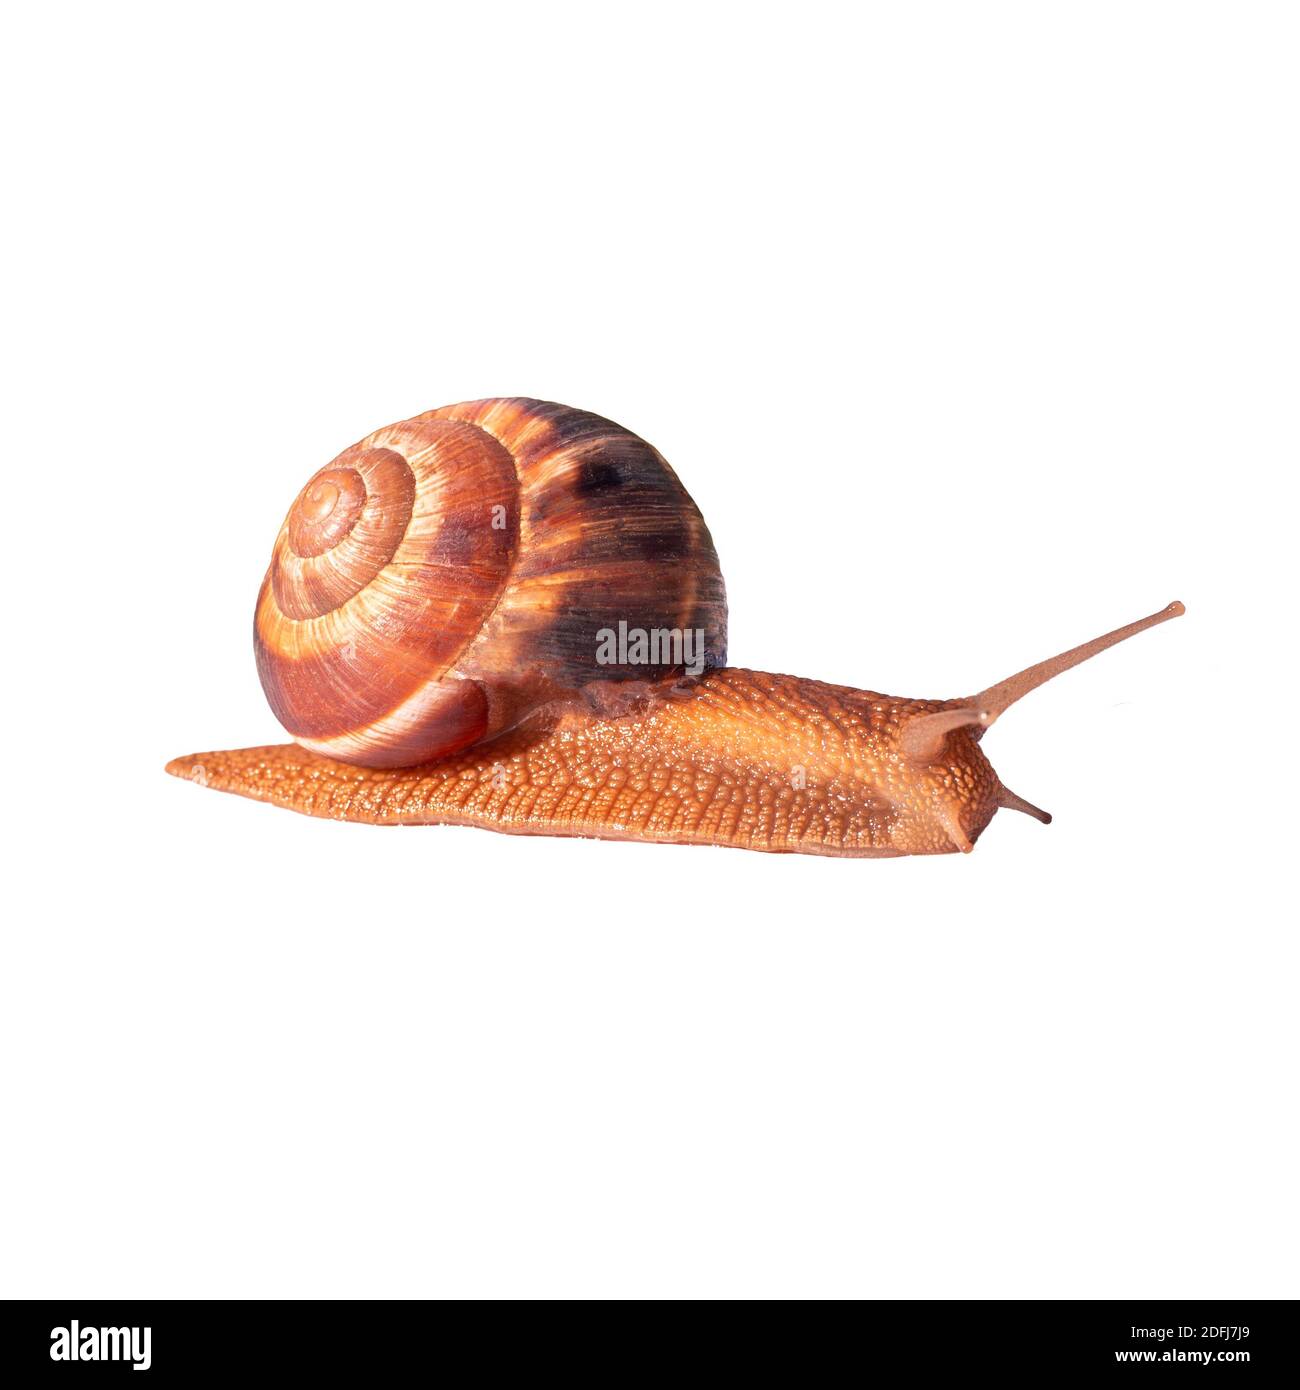 A grape brown snail with a large shell is crawling. Isolated image for print, face cream. Healing snail mucin. Stock Photo